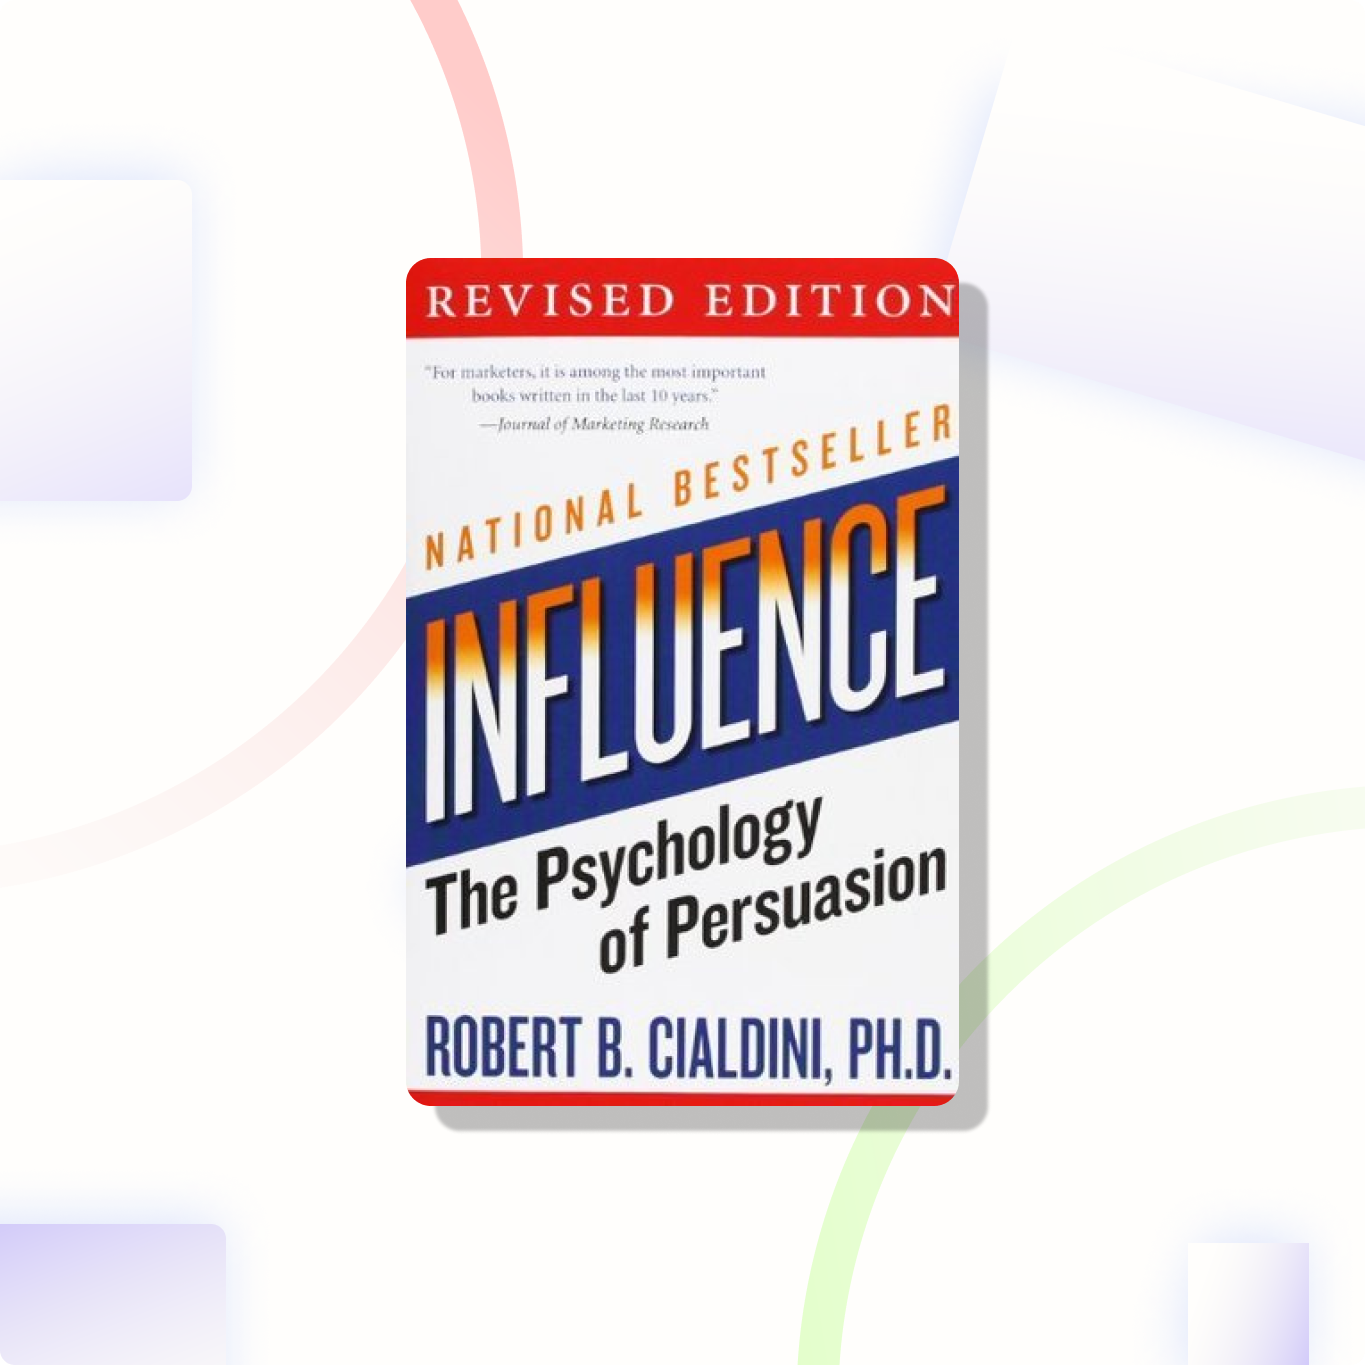 Robert Cialdini Communicates the Power and Principles of Persuasion